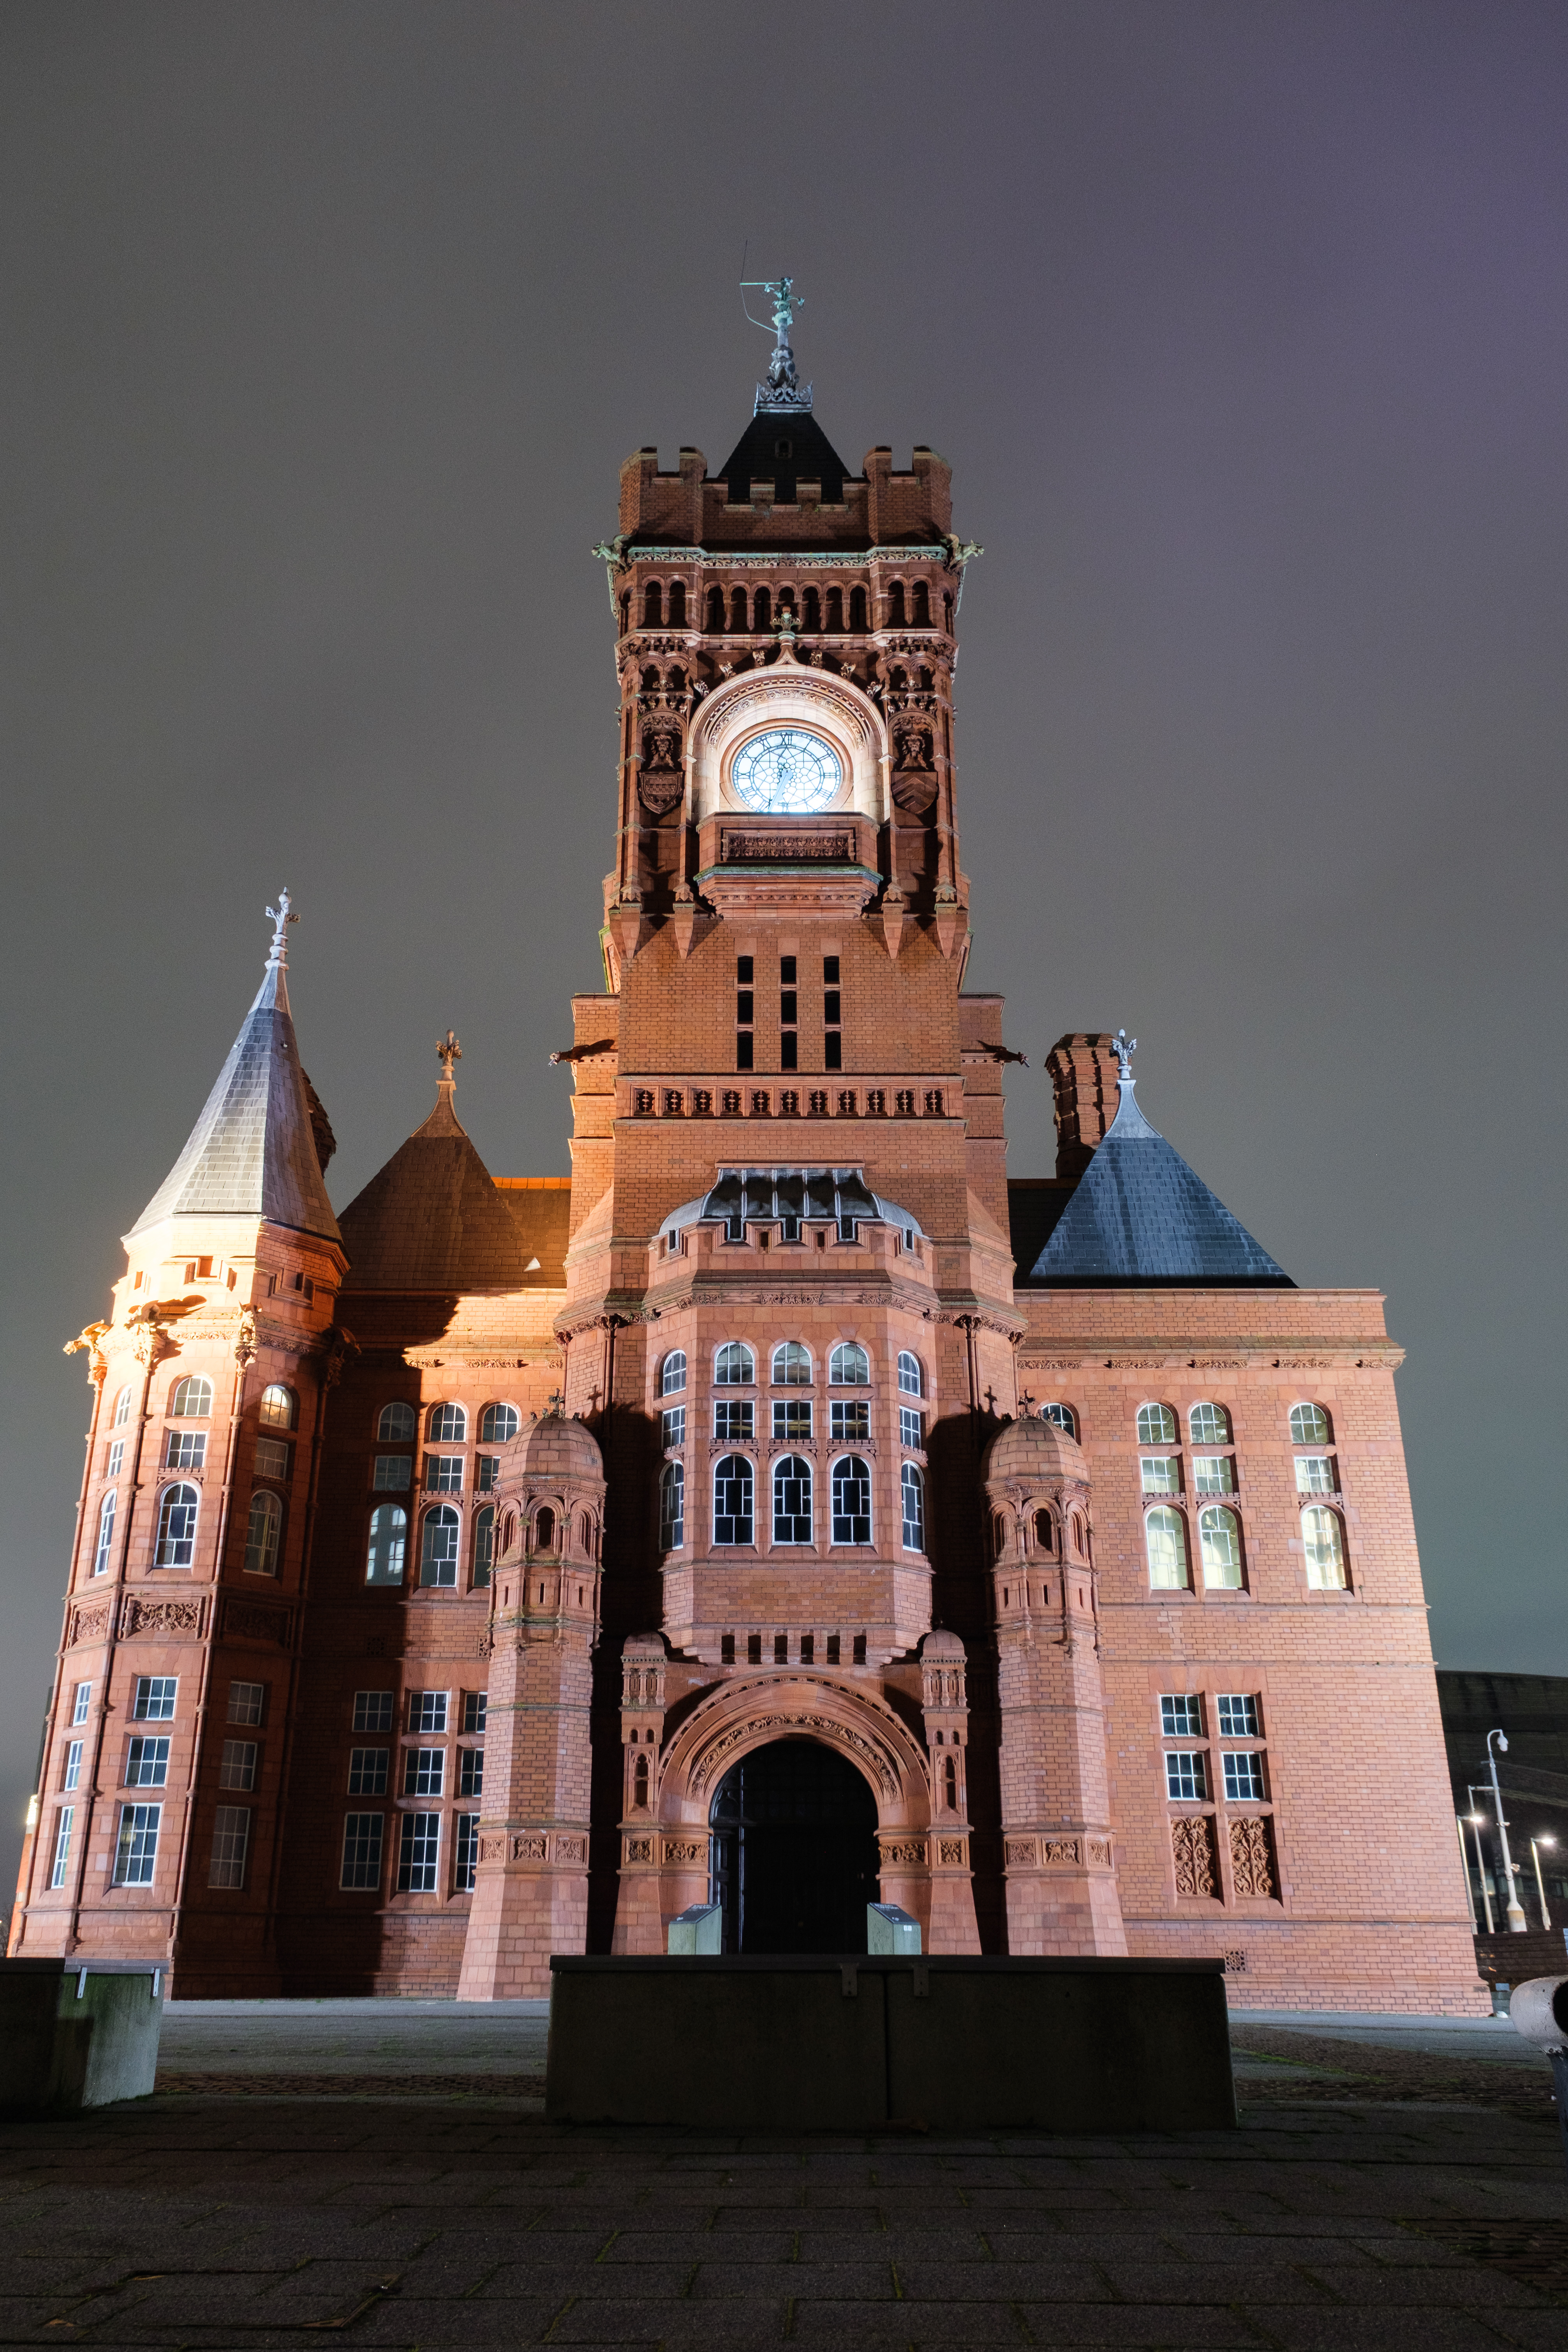 A photograph of the Cardiff Pierhead building taken at night